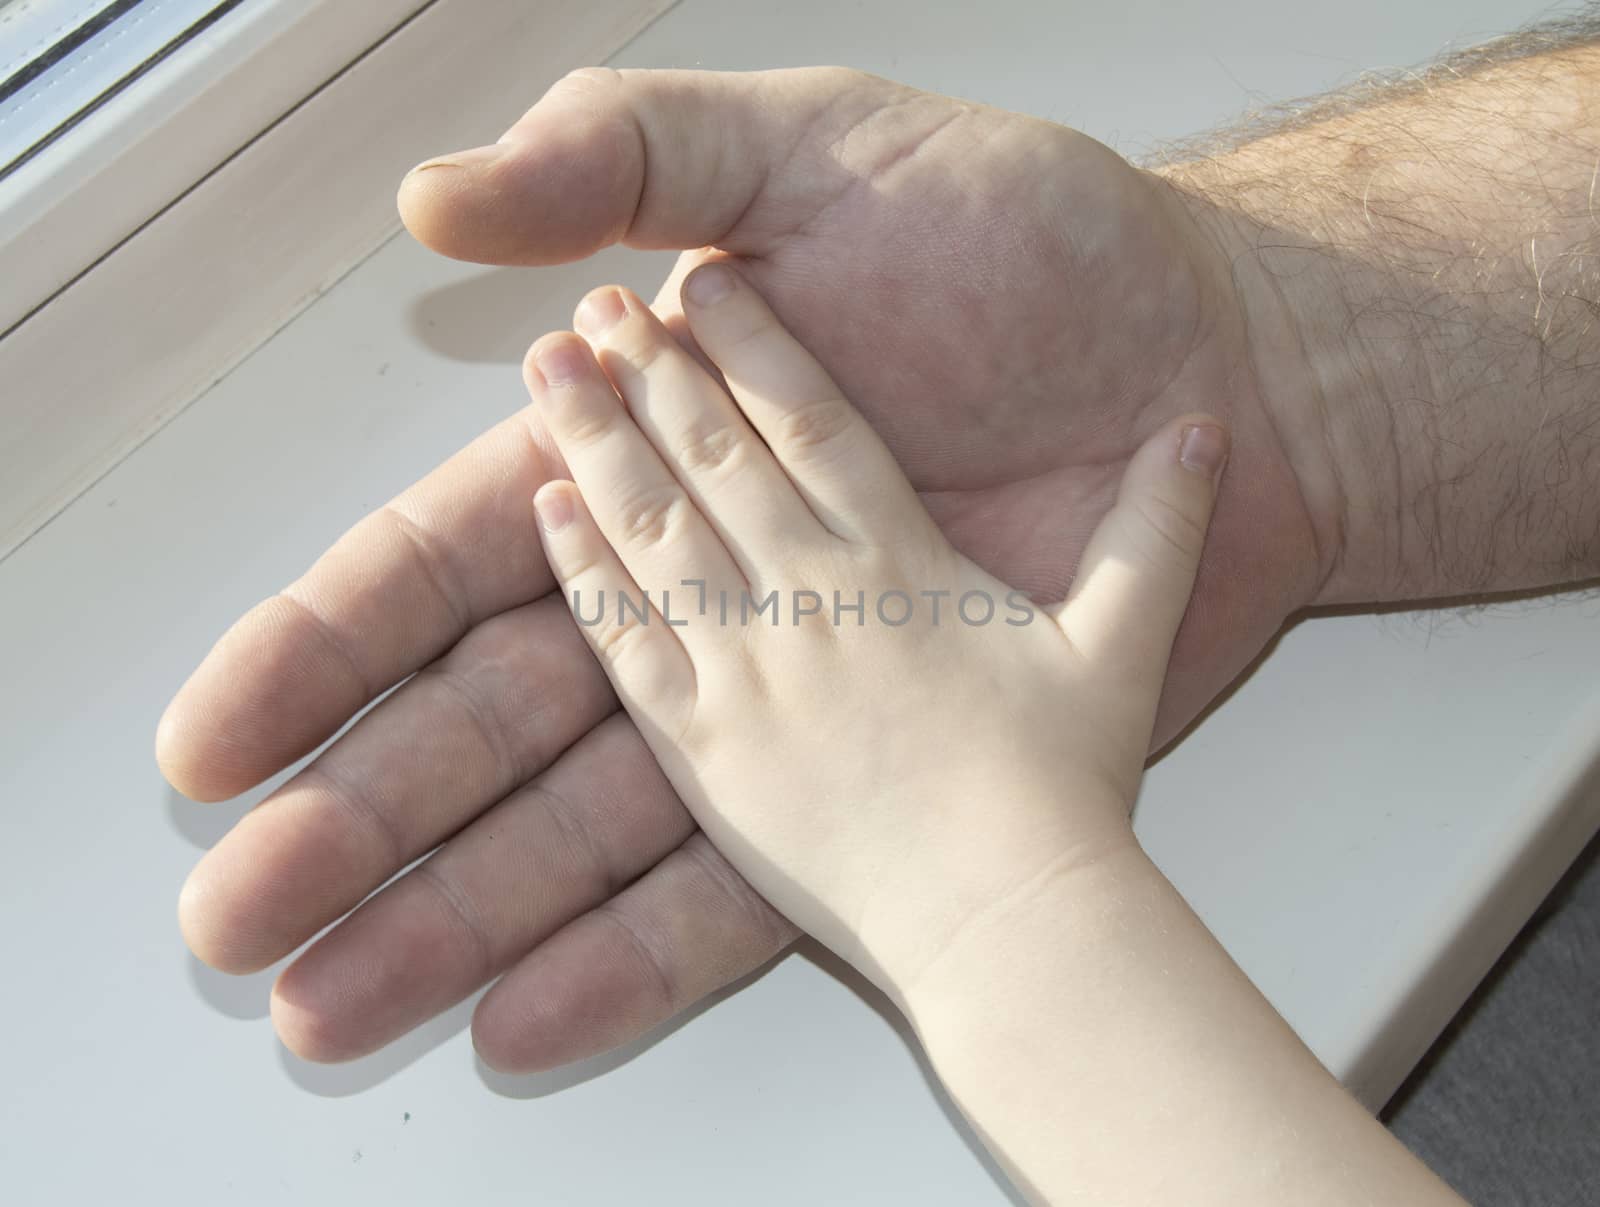 The father carefully holding in his hand the hand of a child. Happy family, care and love, father's day by claire_lucia